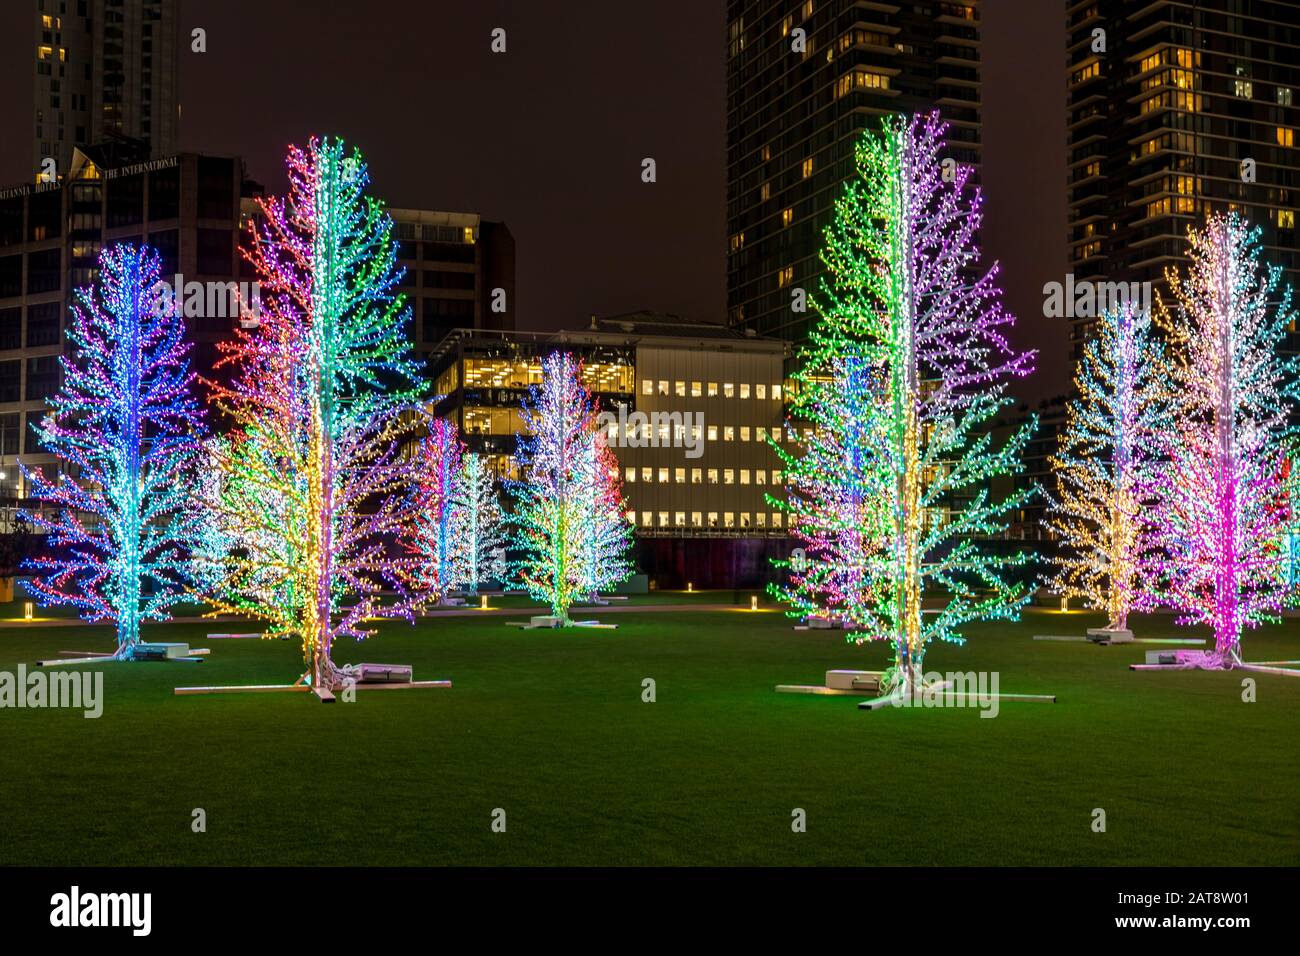 'Sasha Trees' by Adam Decolight at Bank Street Park. 2020 Winter lights festival in Canary Wharf, London, England. Stock Photo